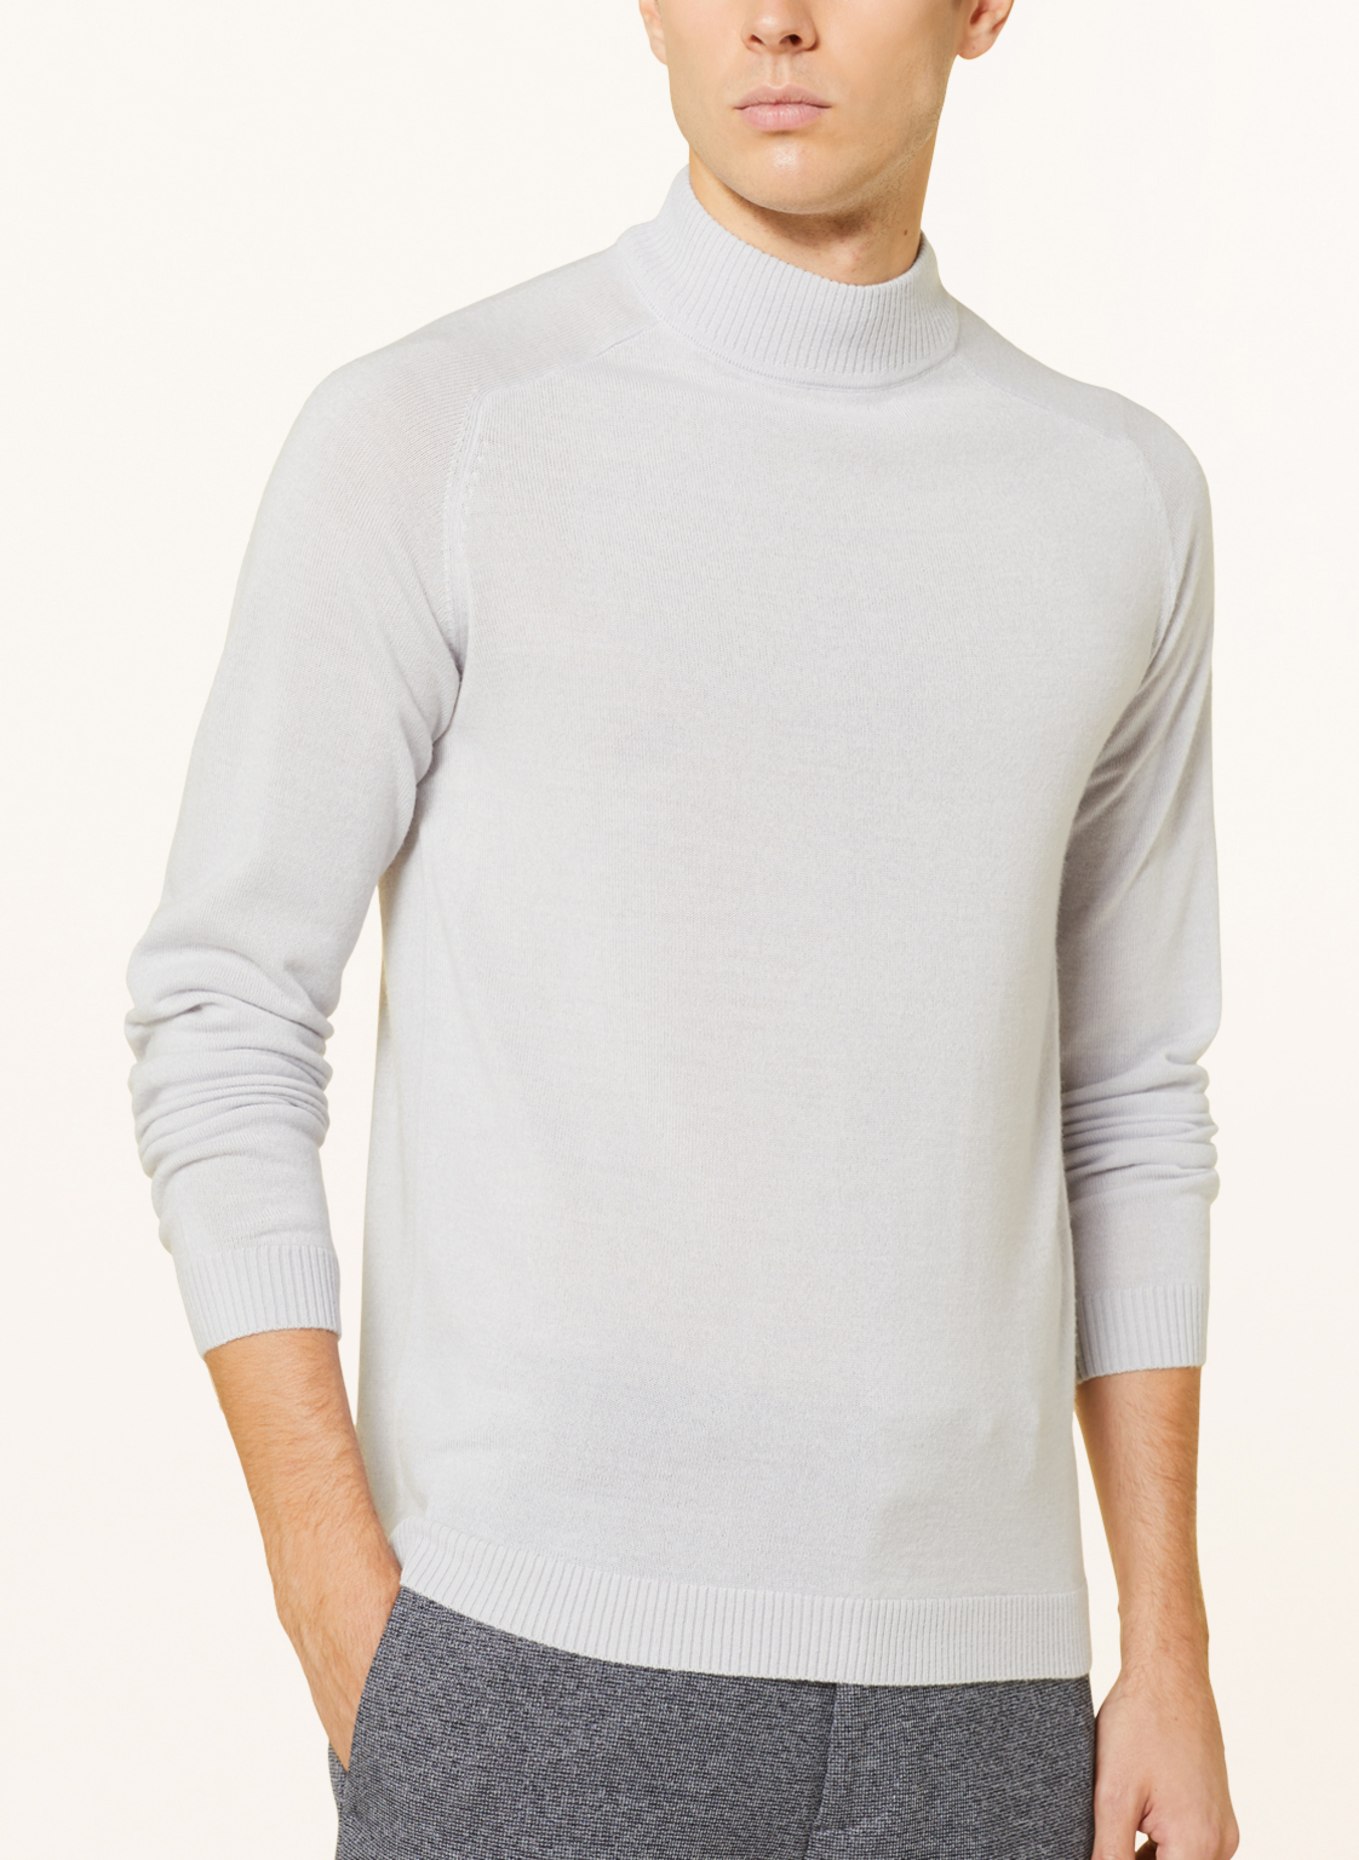 CG - CLUB of GENTS Sweater, Color: LIGHT GRAY (Image 4)